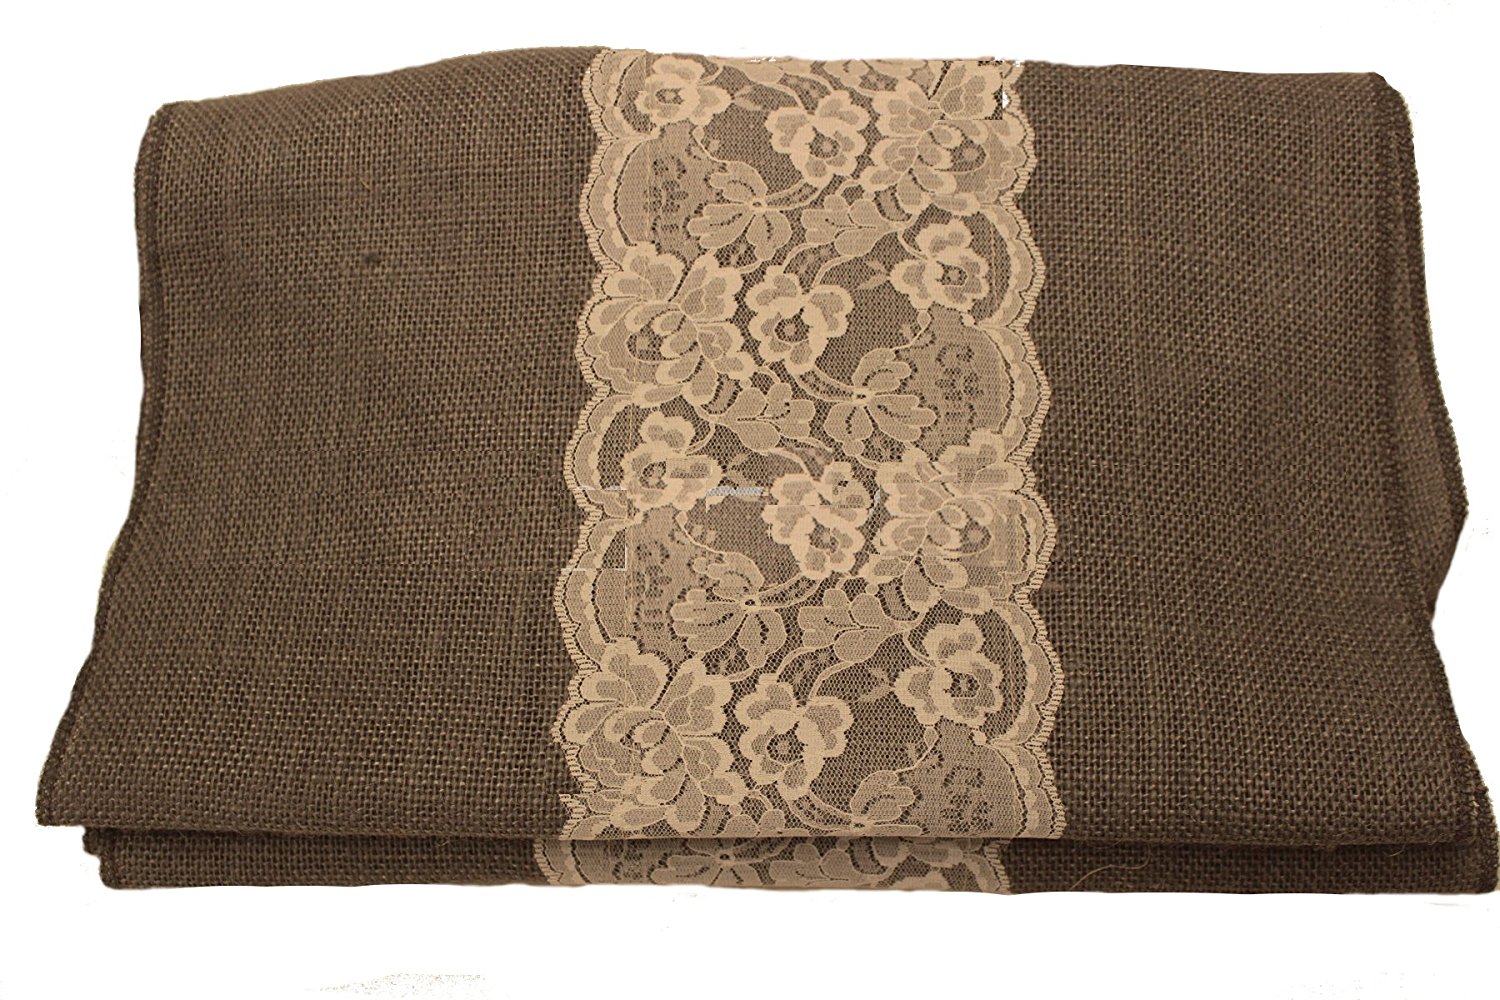 14" Charcoal Grey Burlap Runner with 6" Ivory Lace